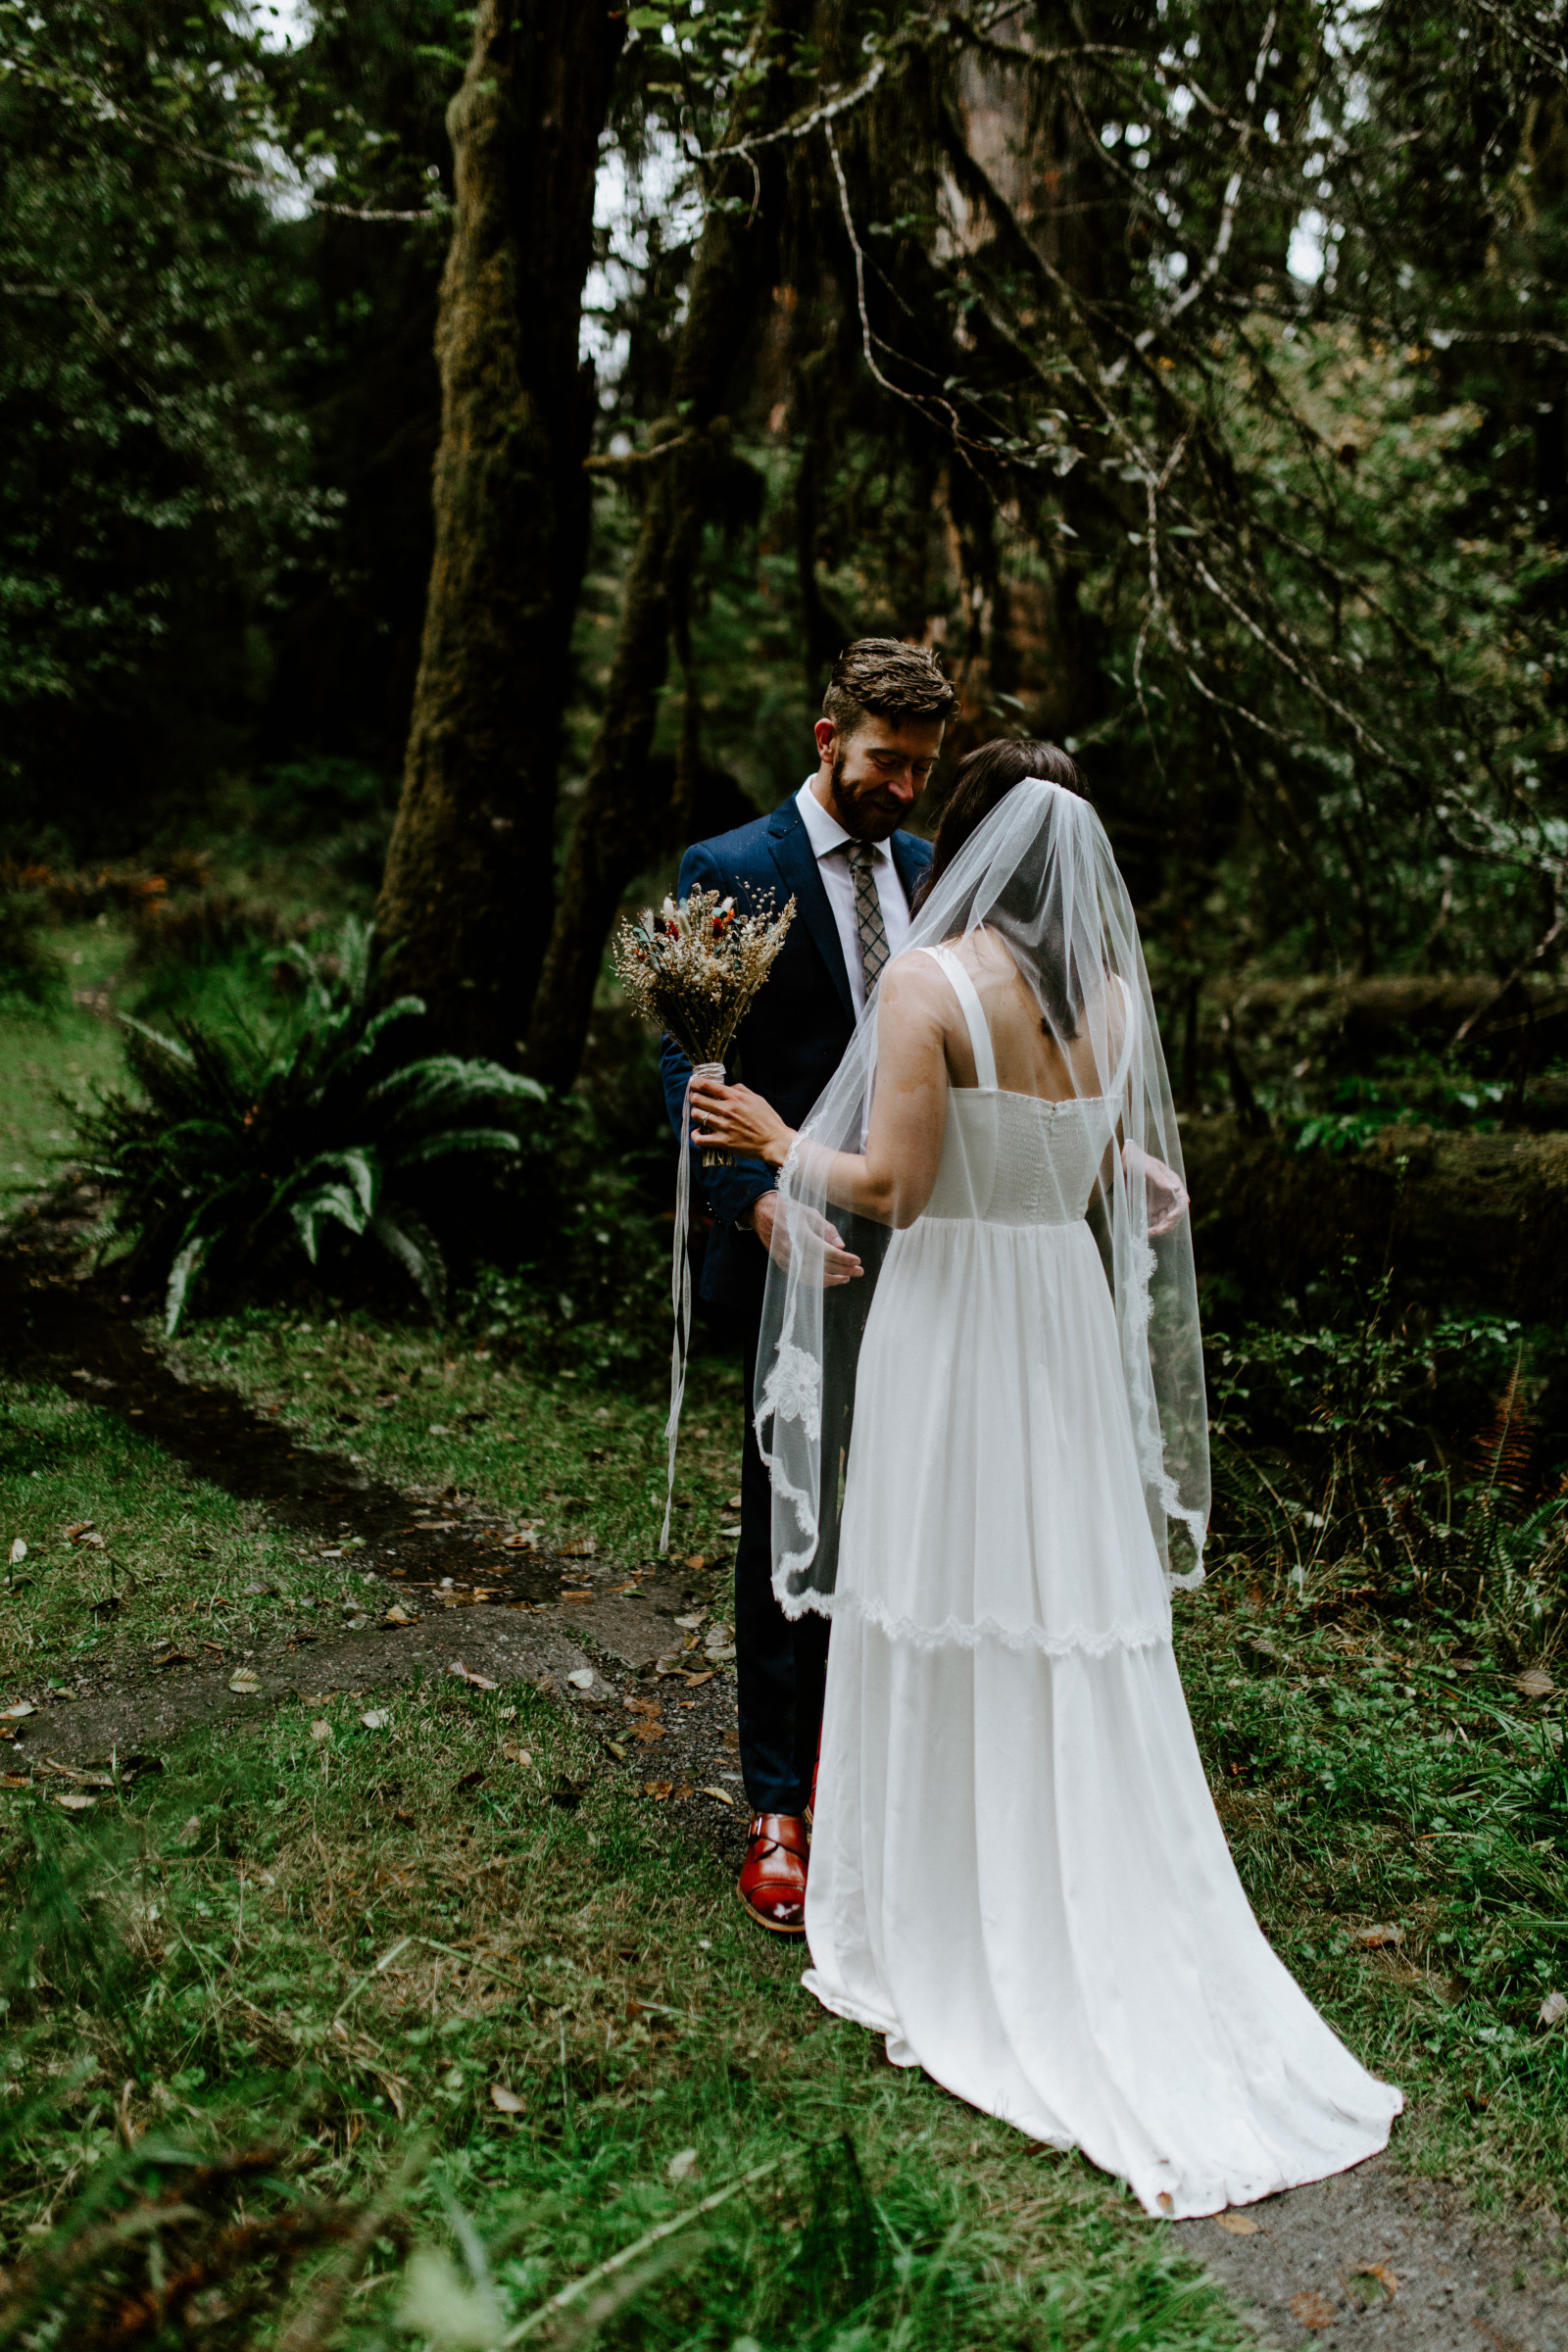 Mollie and Corey hug. Elopement photography in the Olympic National Park by Sienna Plus Josh.